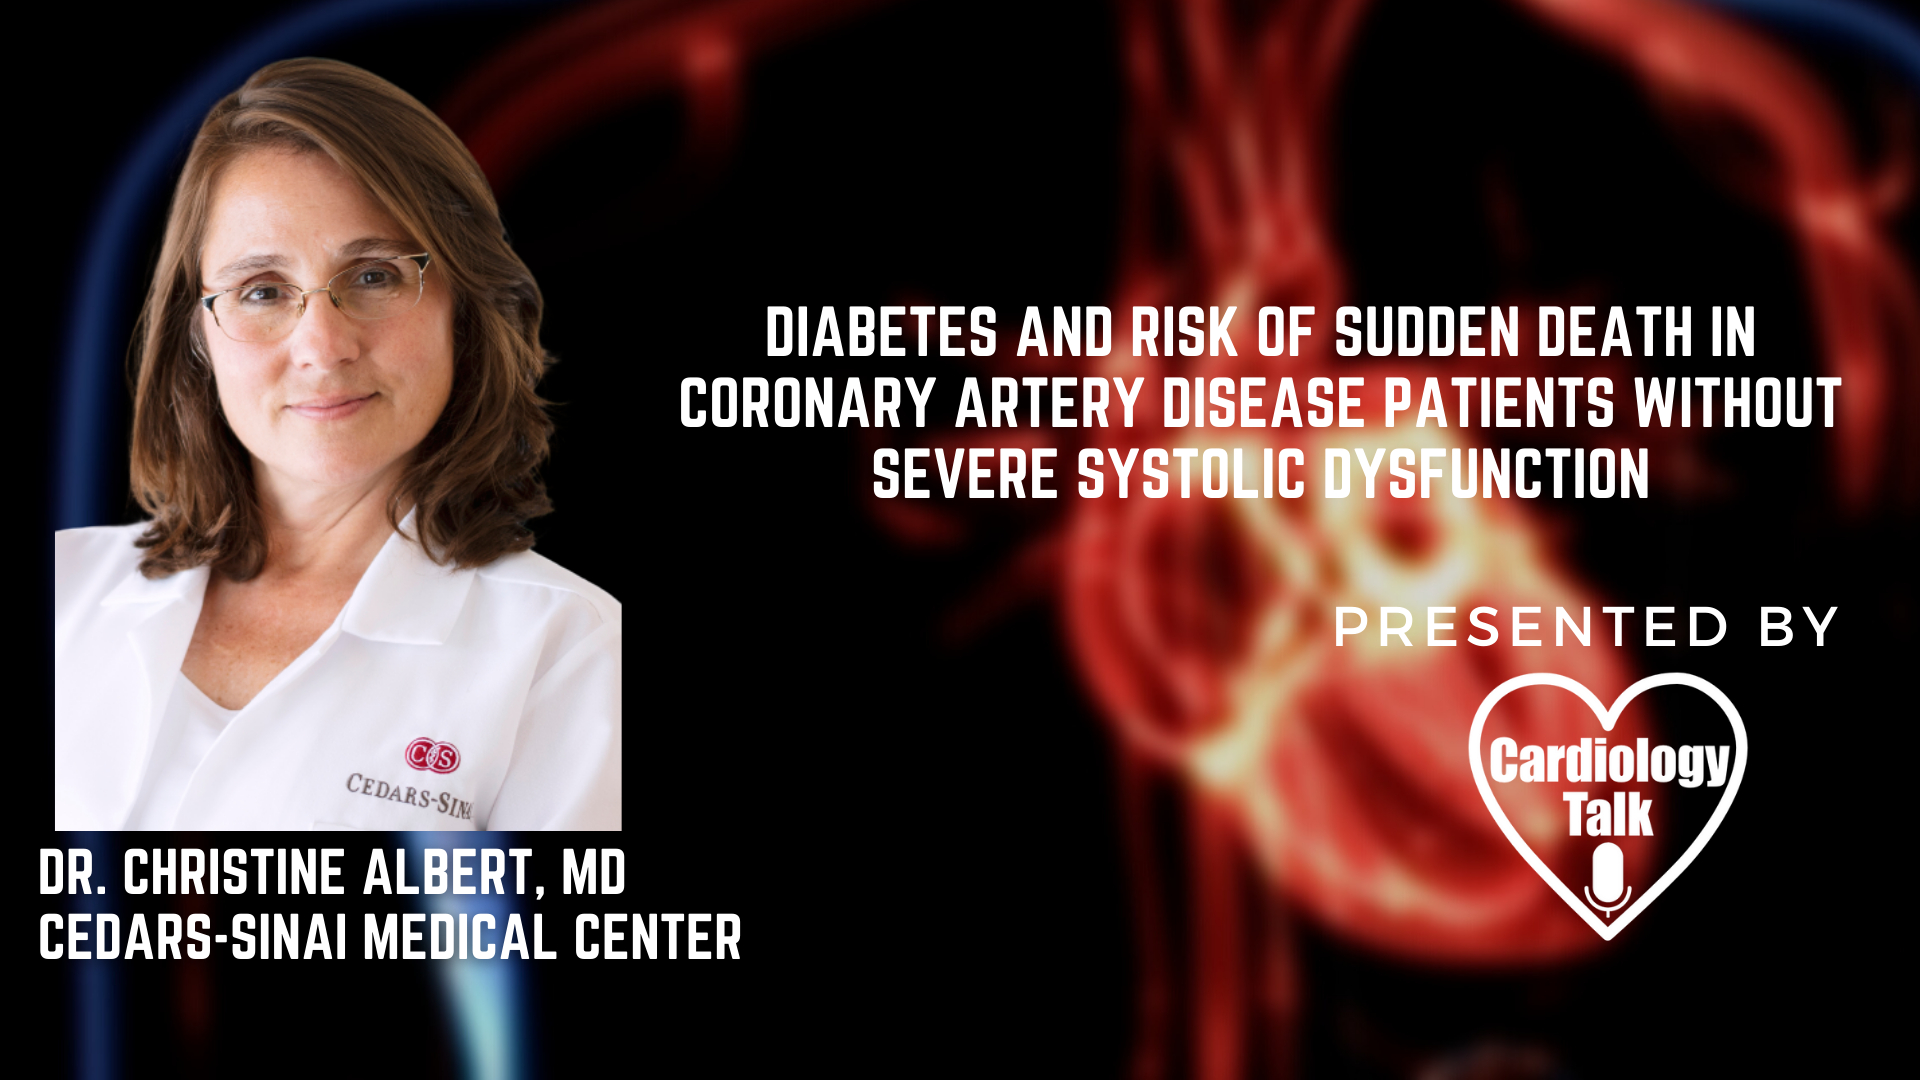 Dr. Christine Albert, MD - Diabetes and Risk of Sudden Death in Coronary Artery Disease Patients Without Severe Systolic Dysfunction